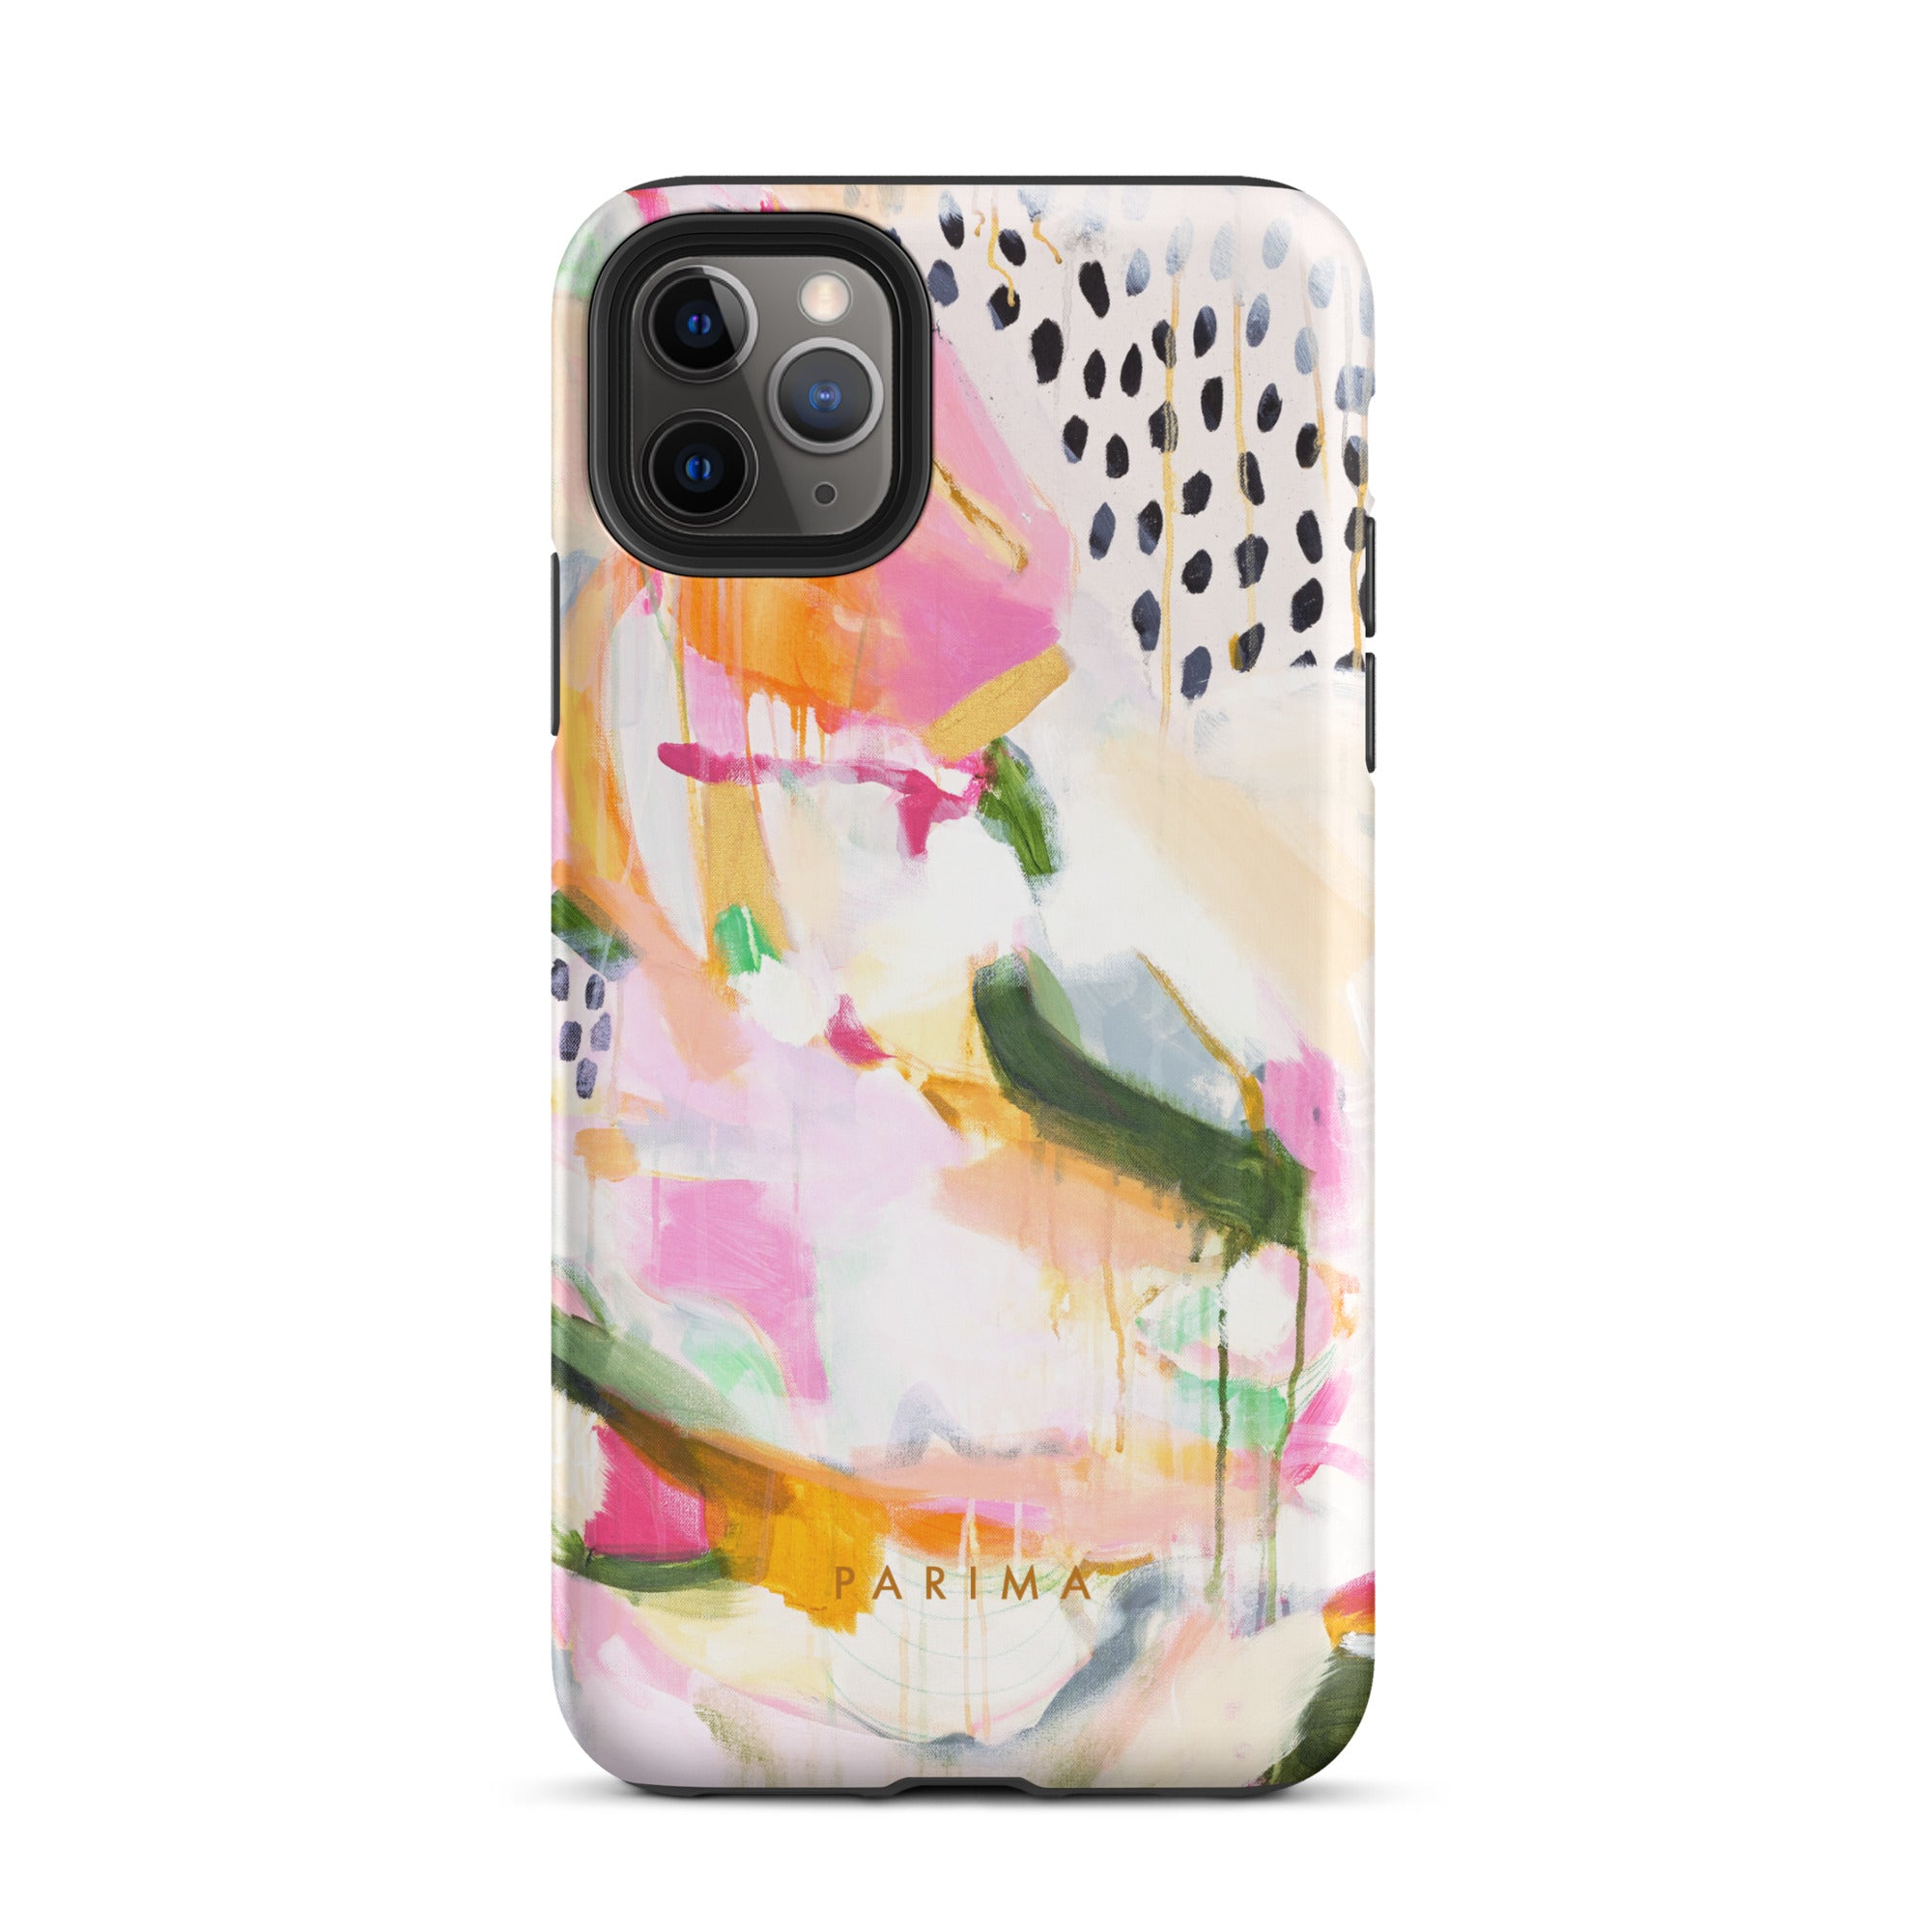 Adira, pink and green abstract art - iPhone 11 Pro Max tough case by Parima Studio